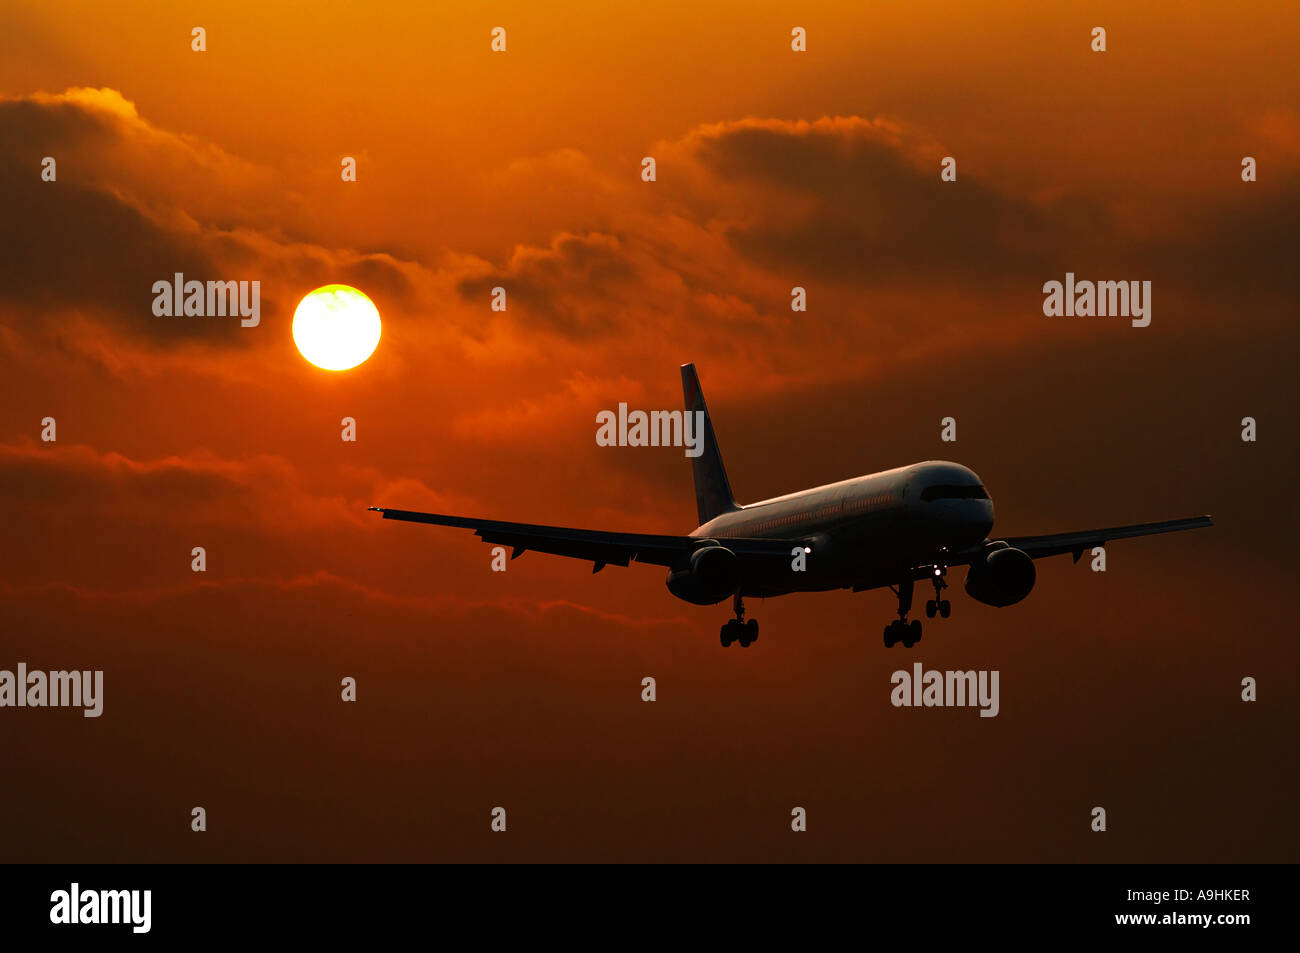 Airplane taking off into a sunset Stock Photo